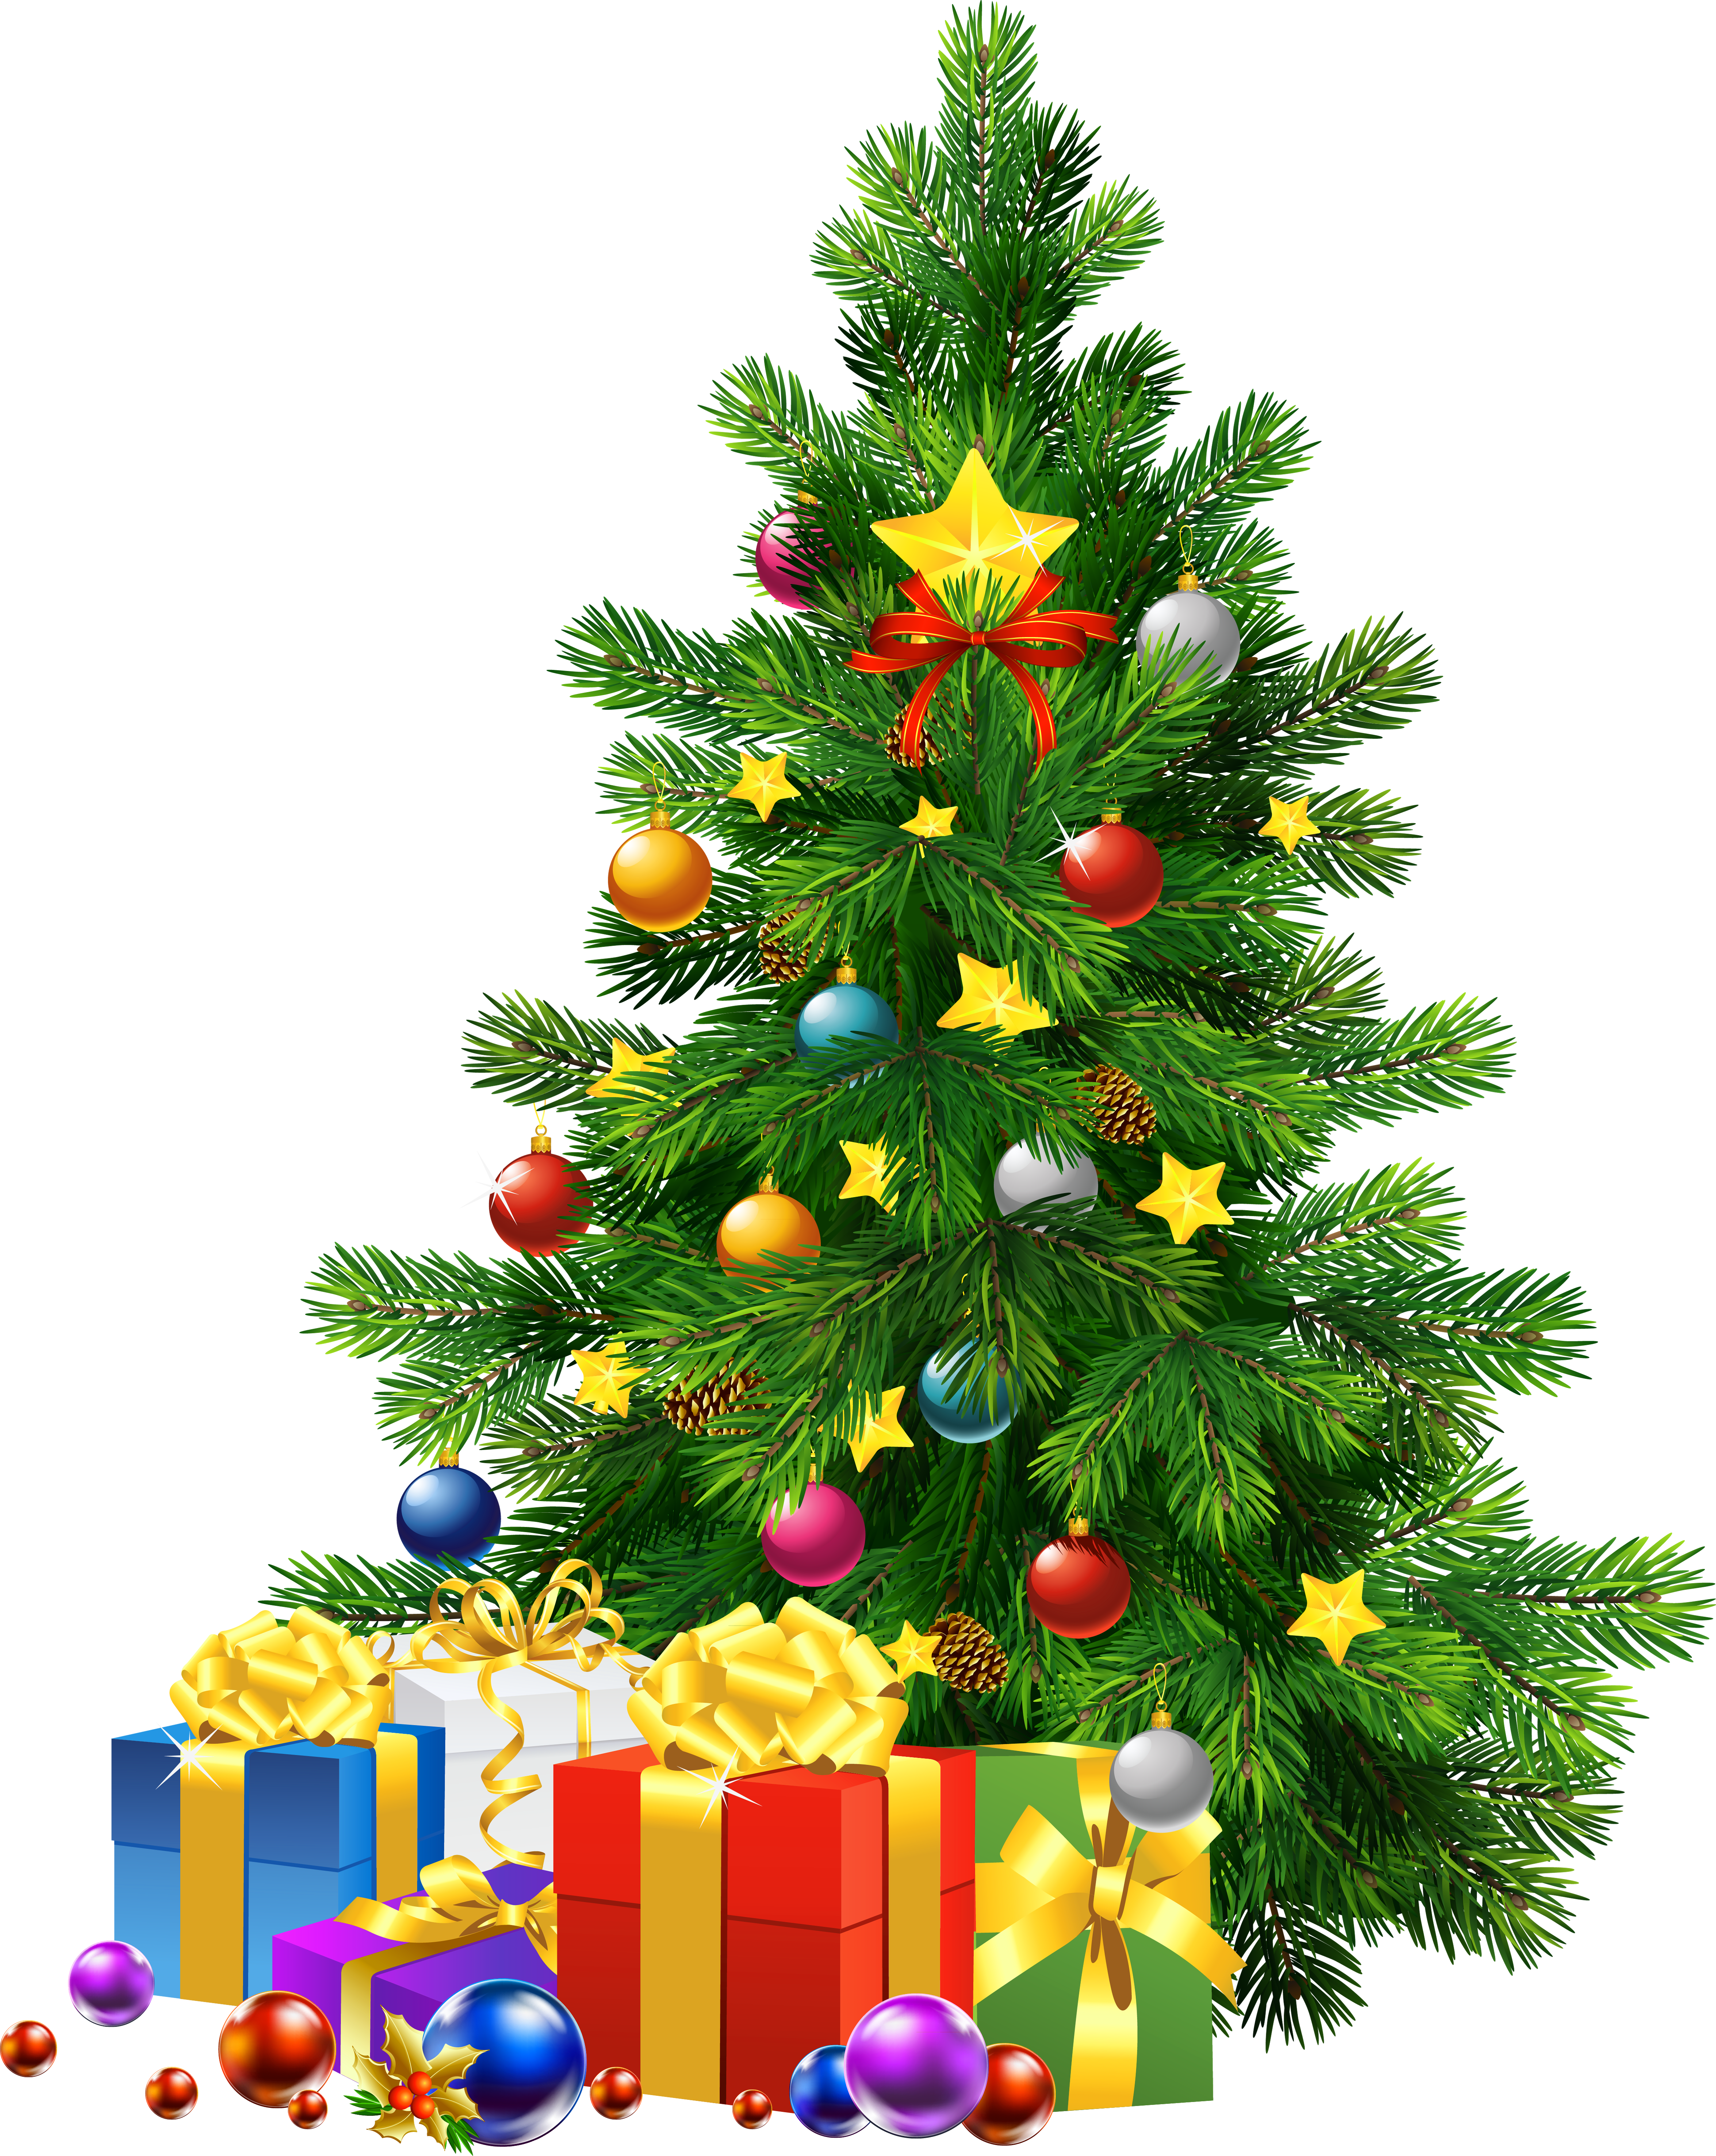 Large Transparent PNG Christmas Tree With Gifts Quality Image And Transparent PNG Free Clipart